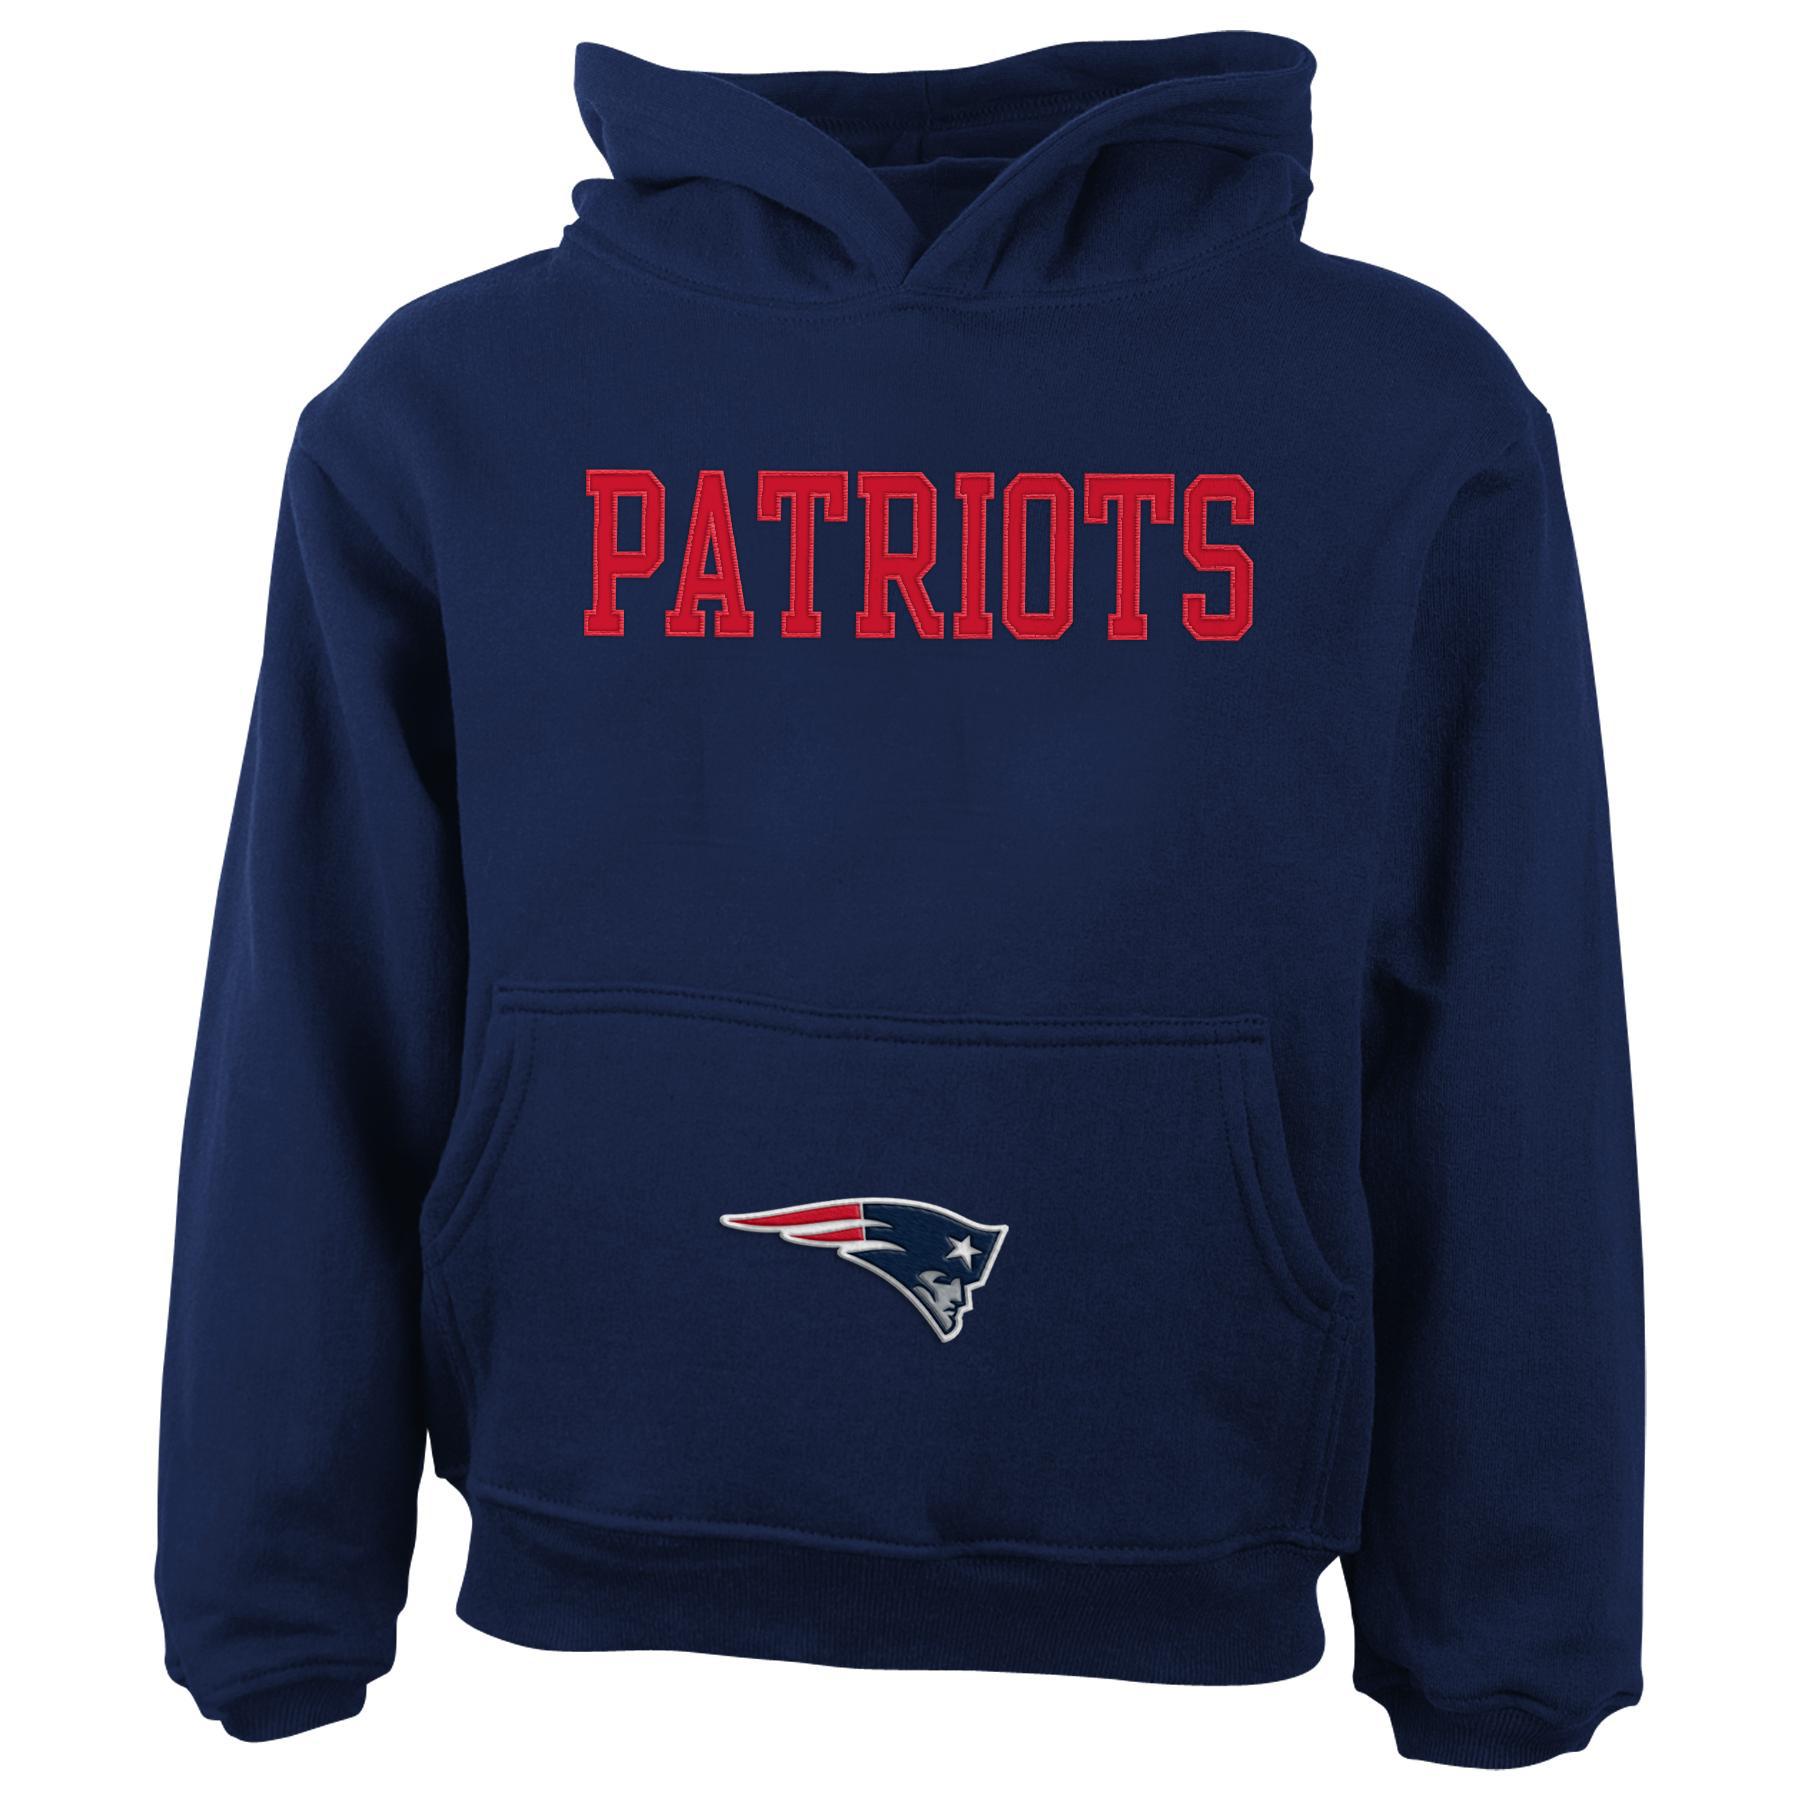 NFL Toddler Boys' Hoodie - New England Patriots